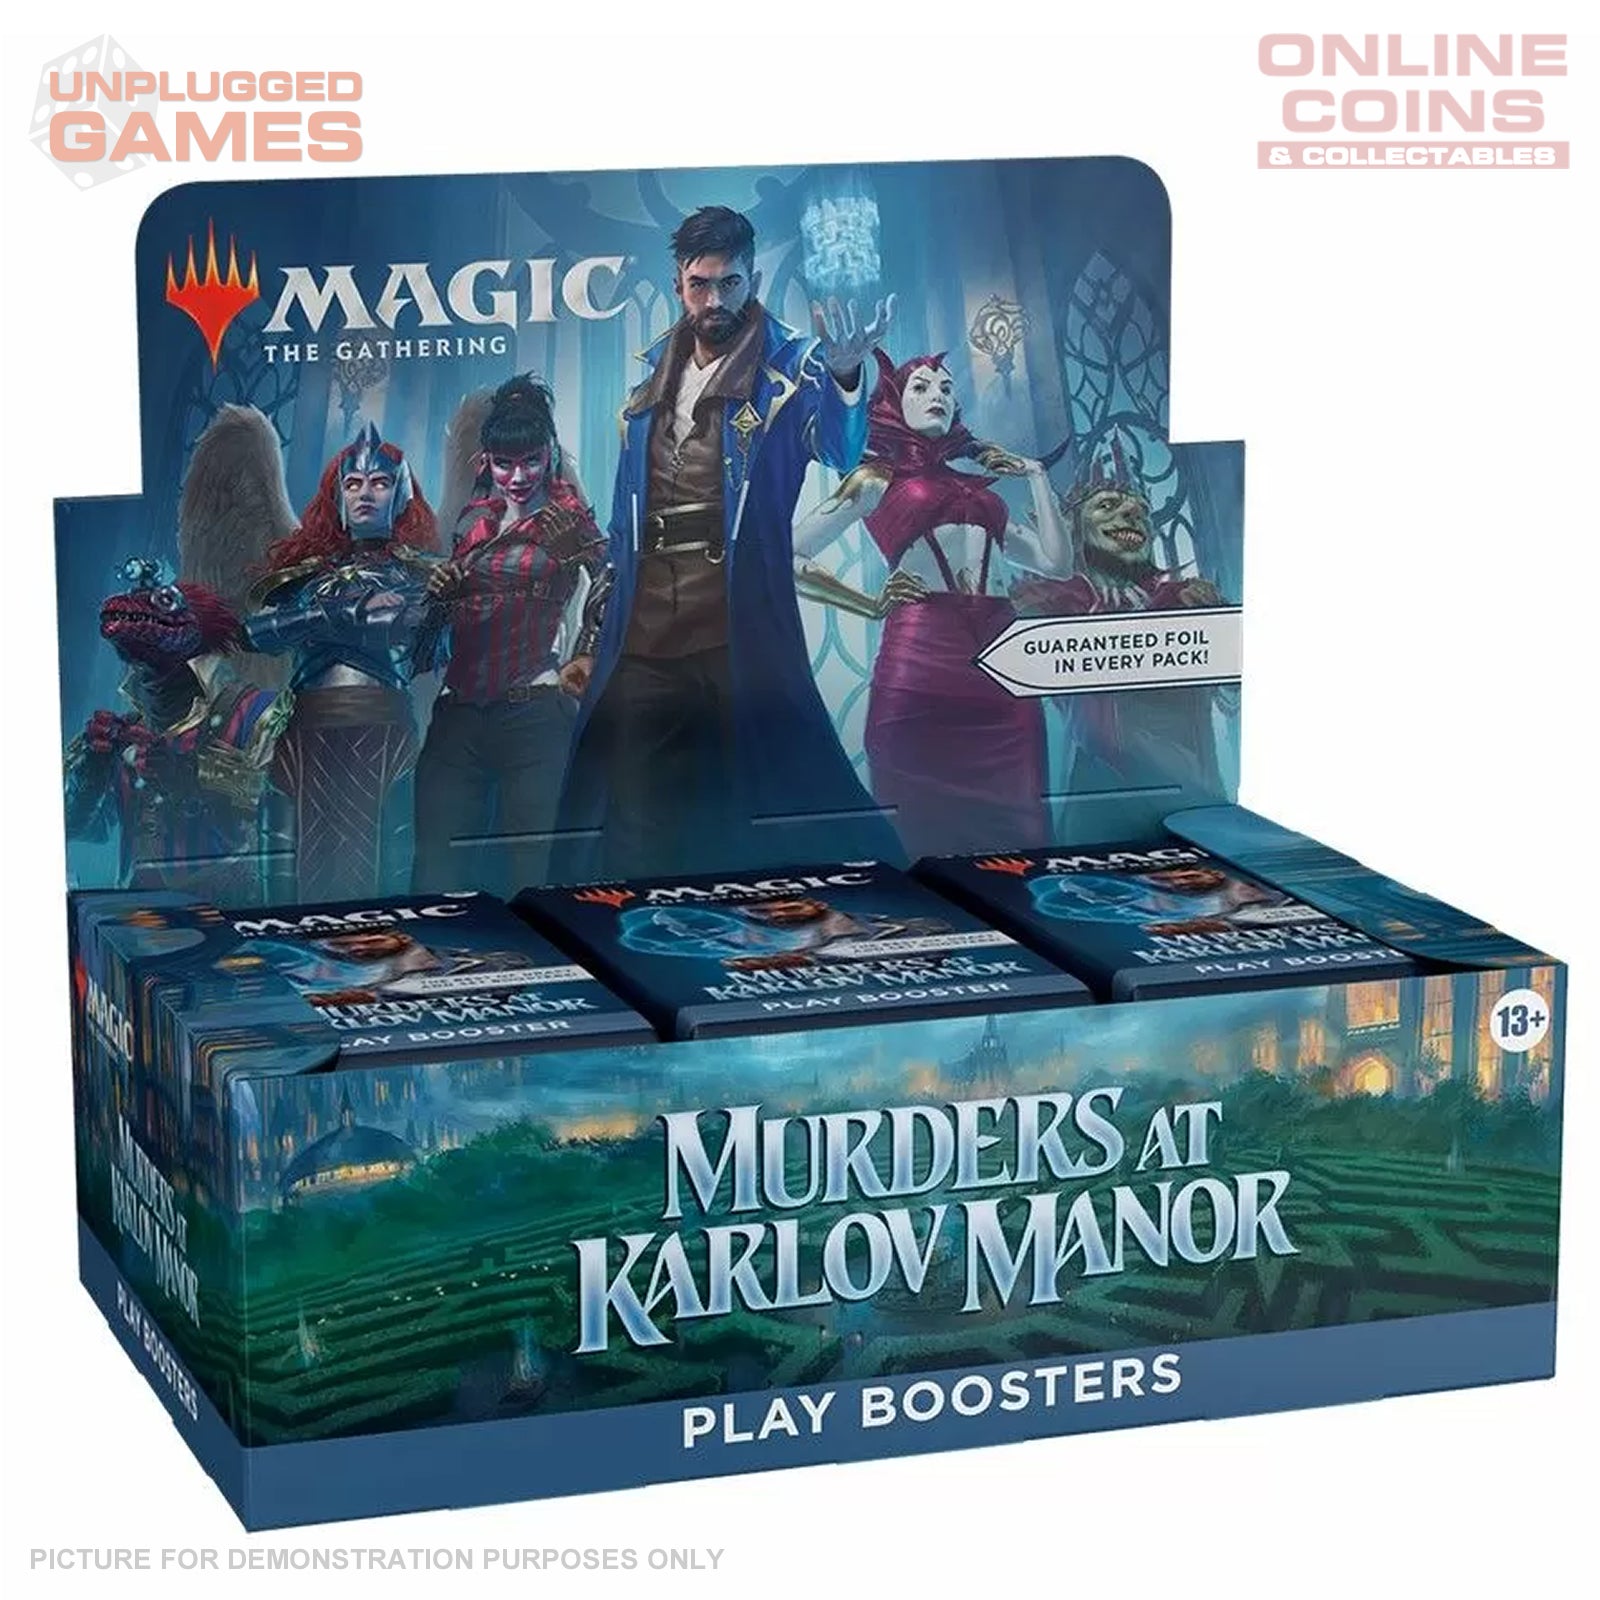 Magic The Gathering - Murders at Karlov Manor Play Booster Box of 36 Packs